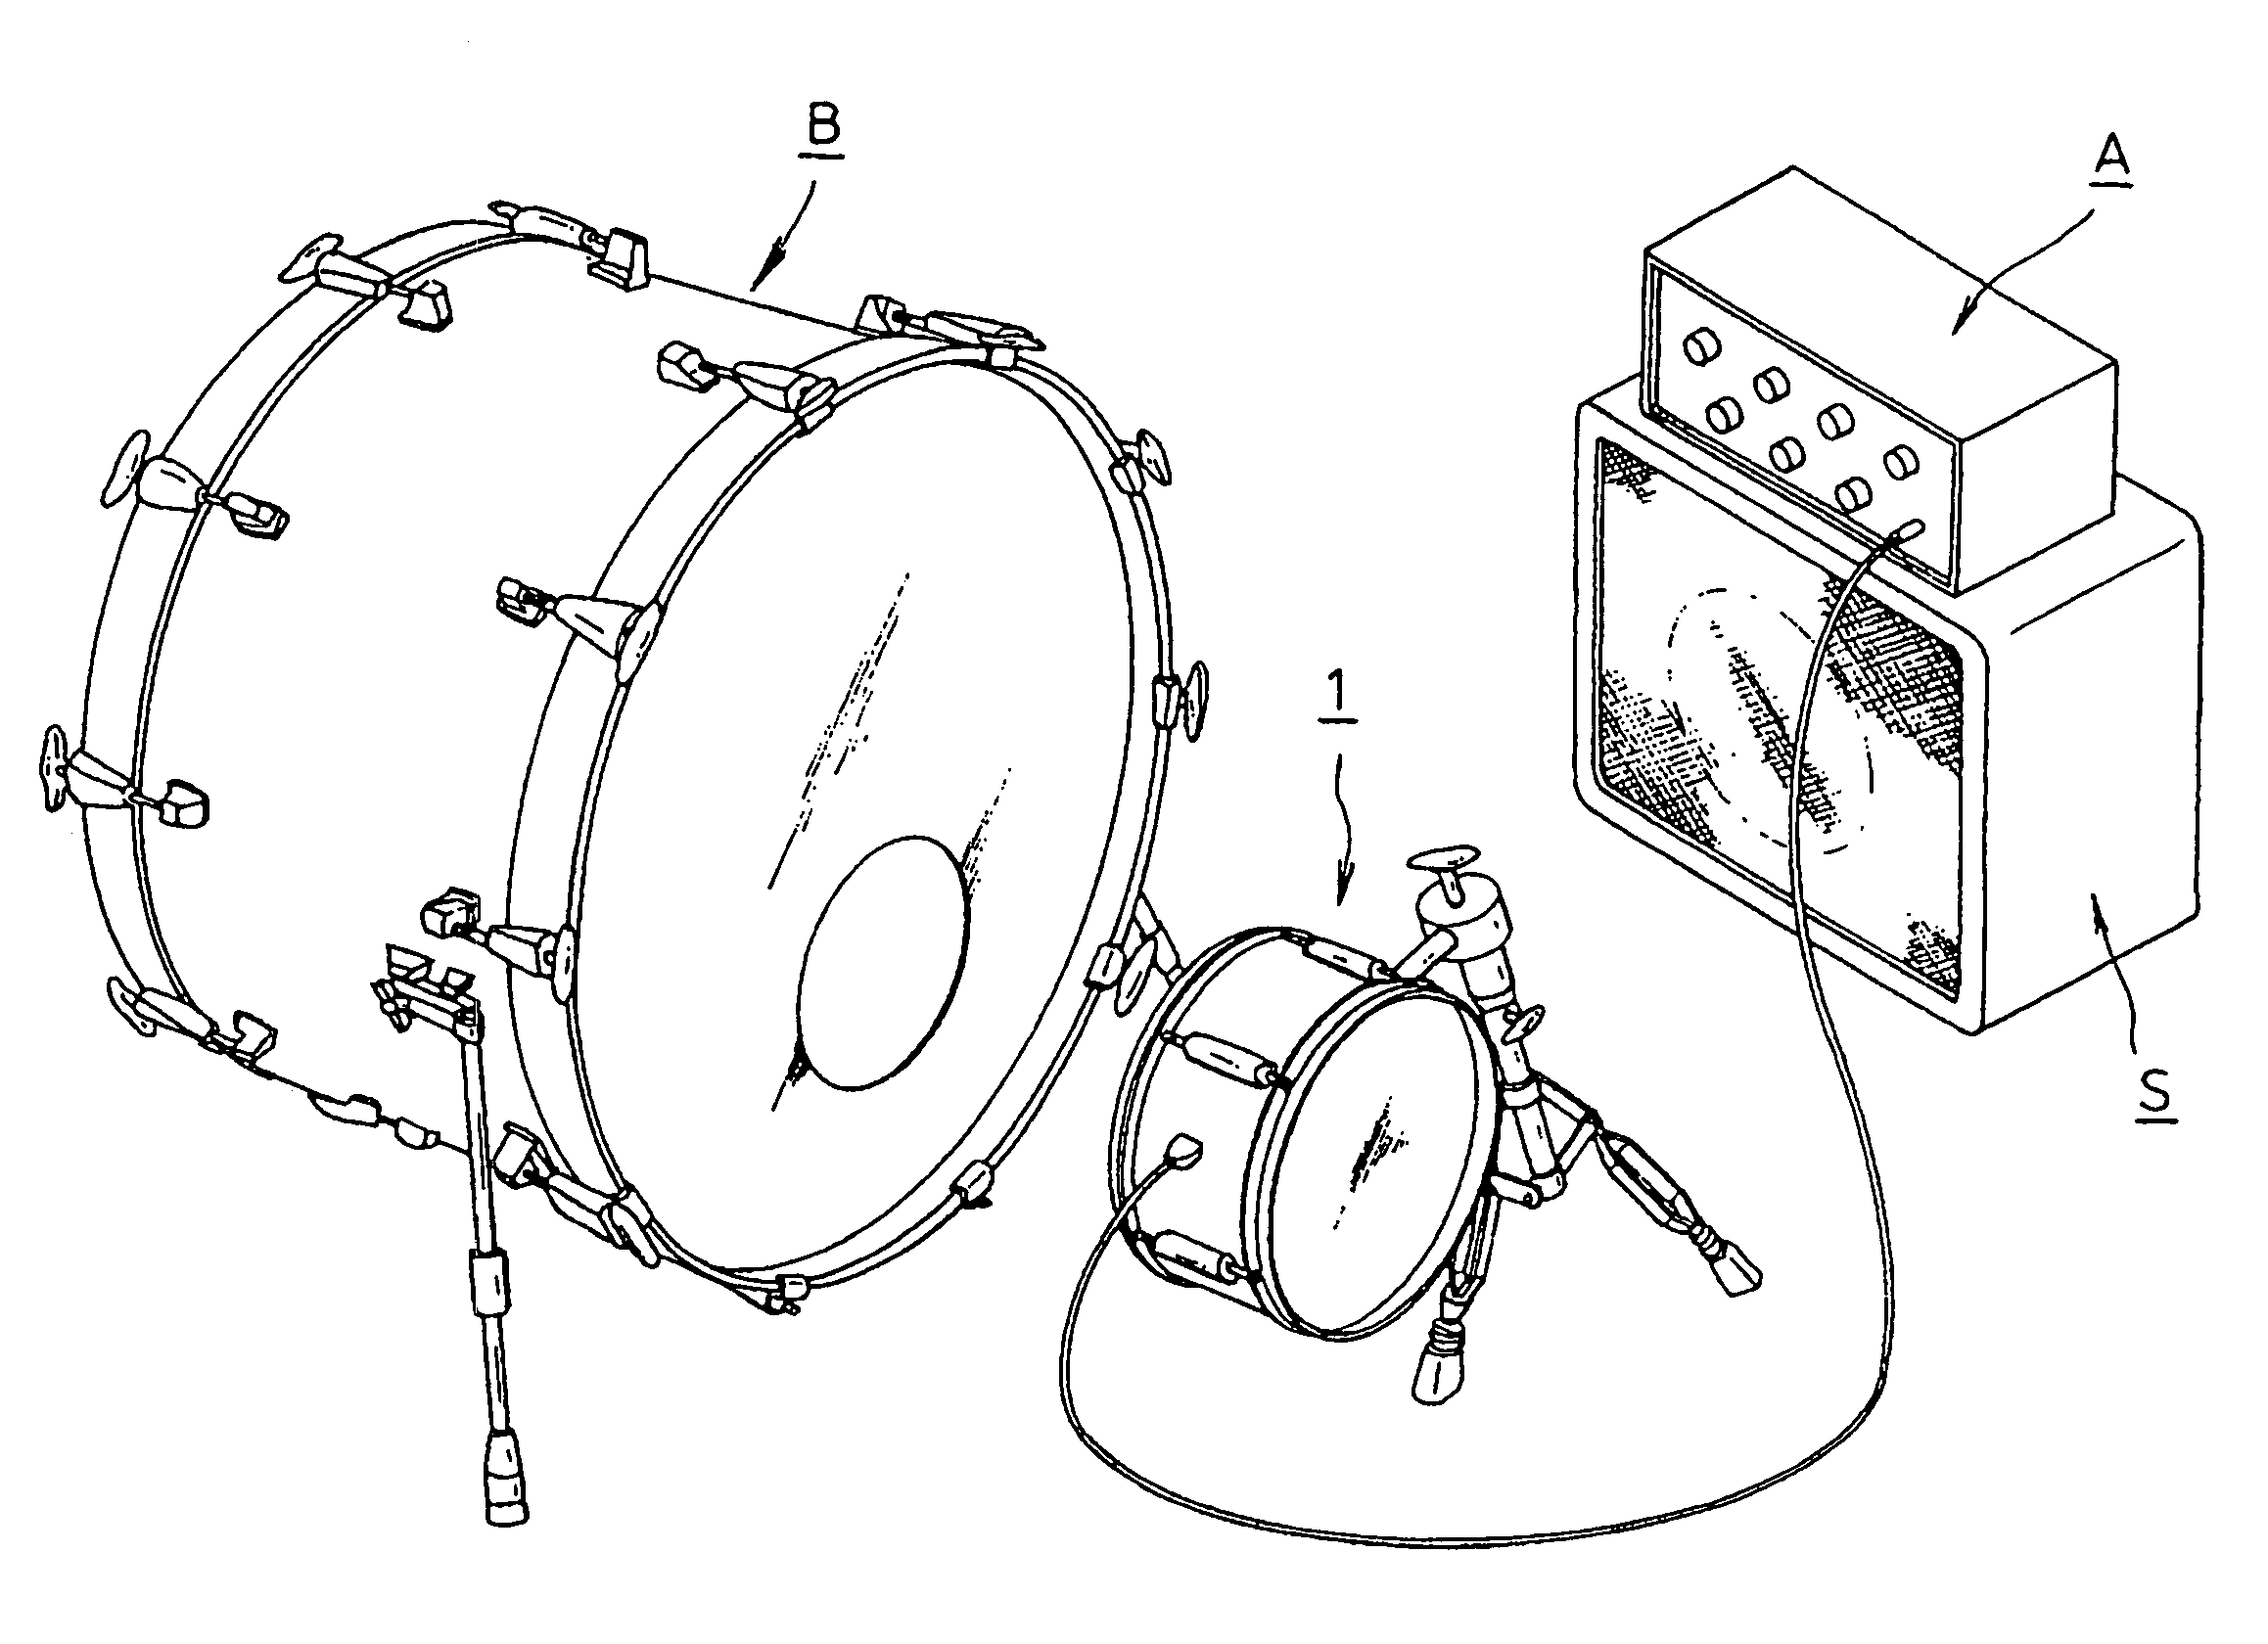 Sound pickup device for percussion instrument